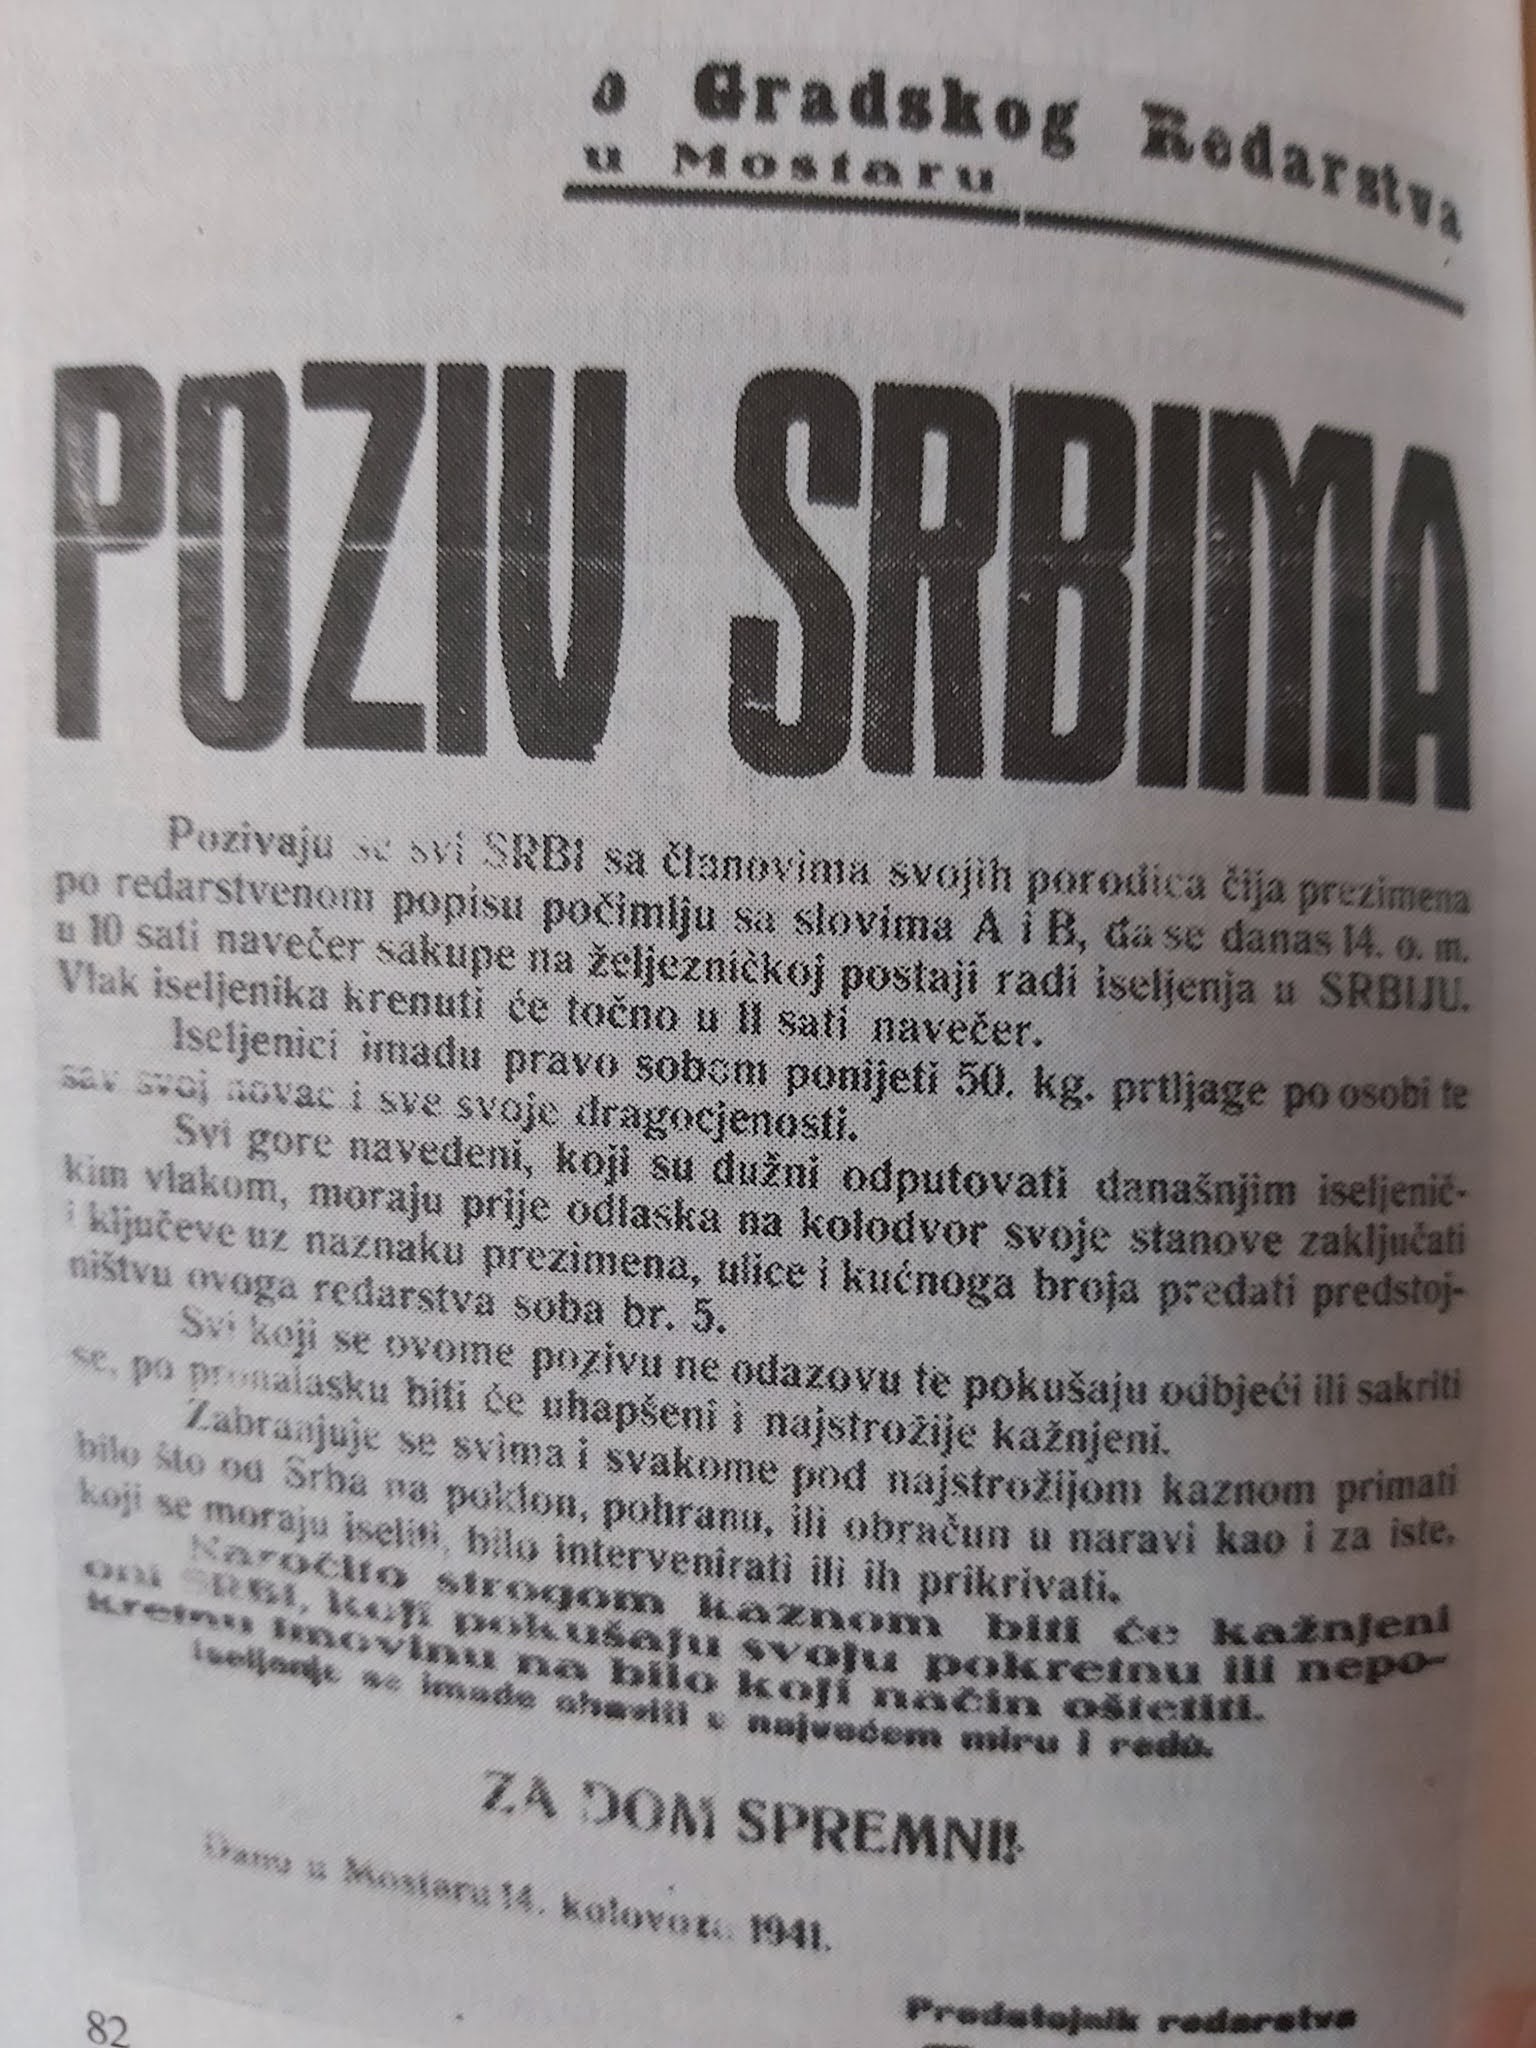 street ustashe poster as of Aug 14, 1941, informing the Serbs of Mostar whose last names start with A-B they are being expelled from Mostar on short notice.